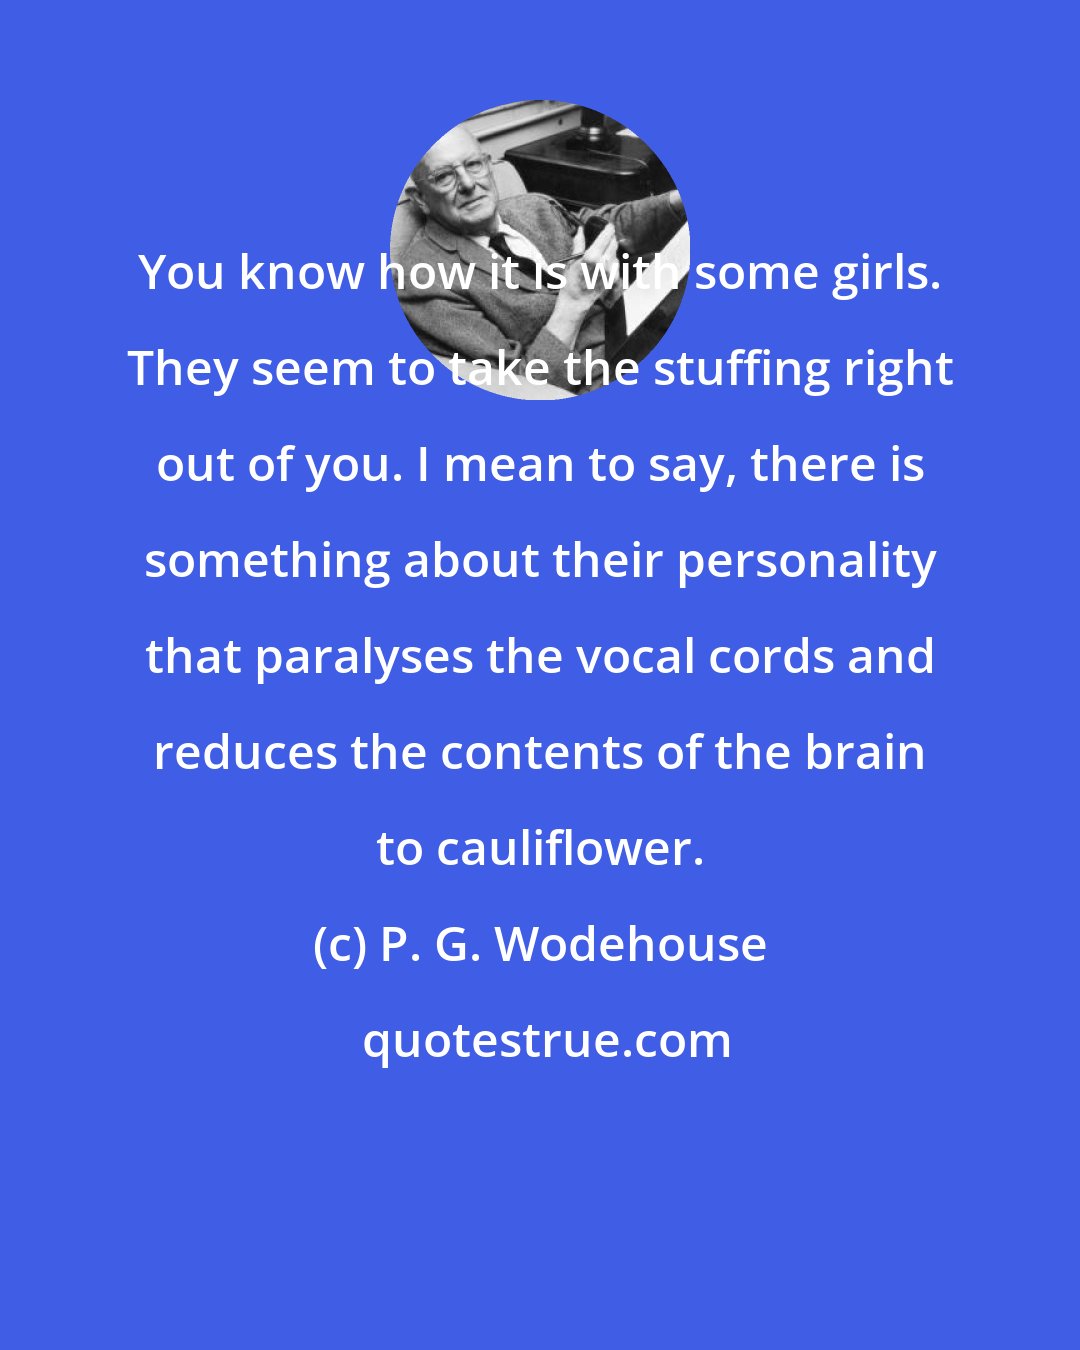 P. G. Wodehouse: You know how it is with some girls. They seem to take the stuffing right out of you. I mean to say, there is something about their personality that paralyses the vocal cords and reduces the contents of the brain to cauliflower.